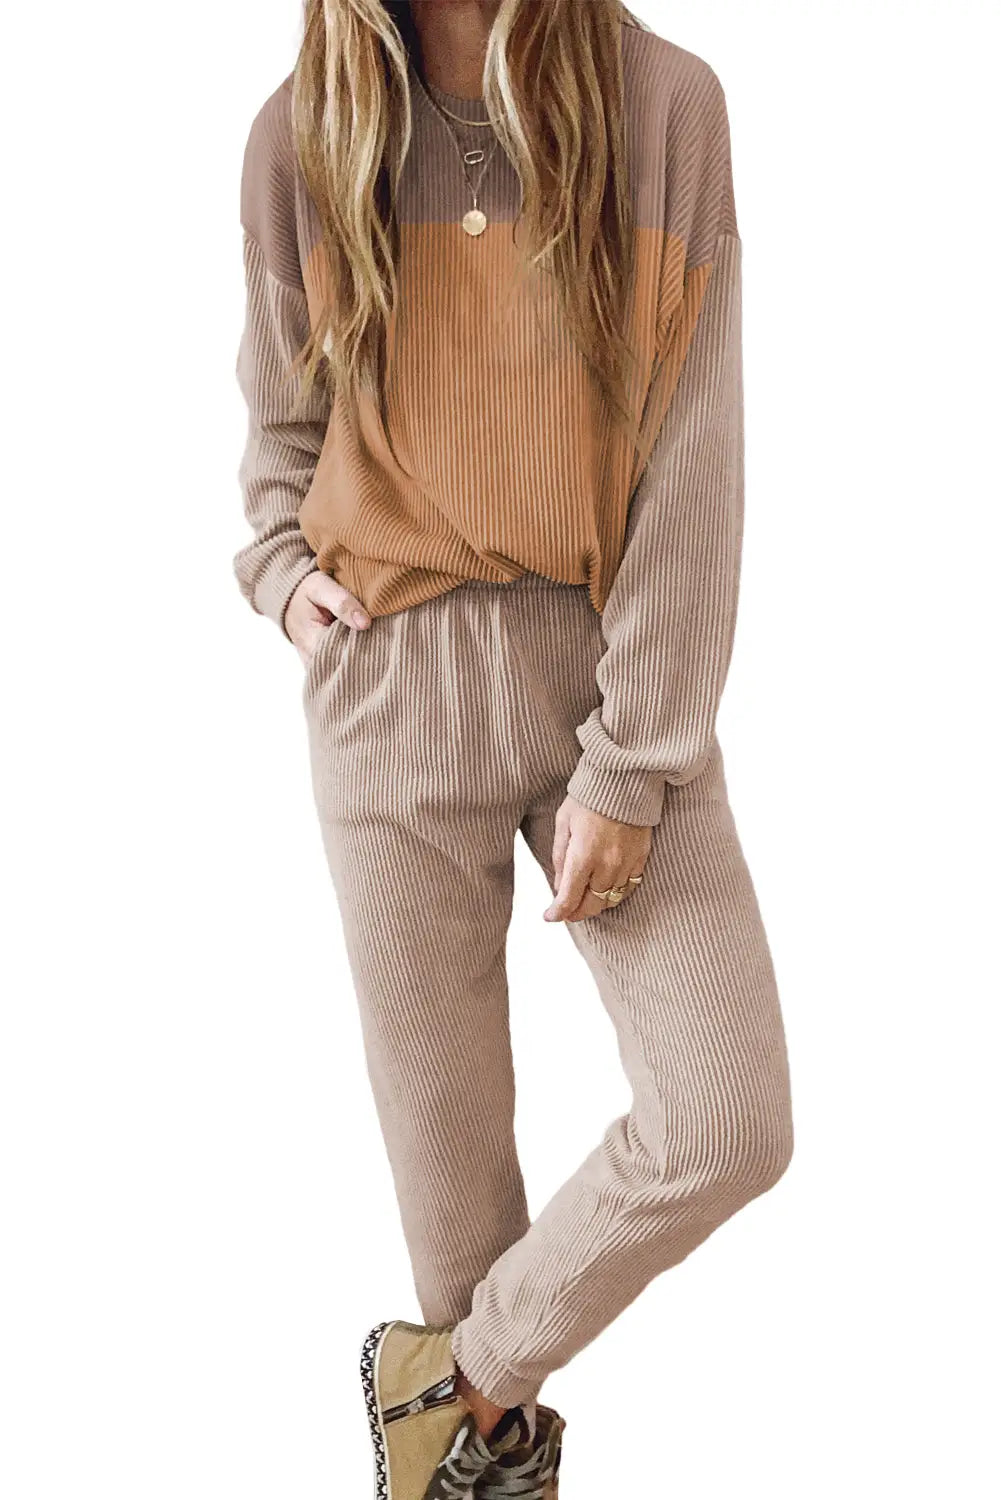 Brown corded 2pcs colorblock pullover and pants outfit - joggers sets